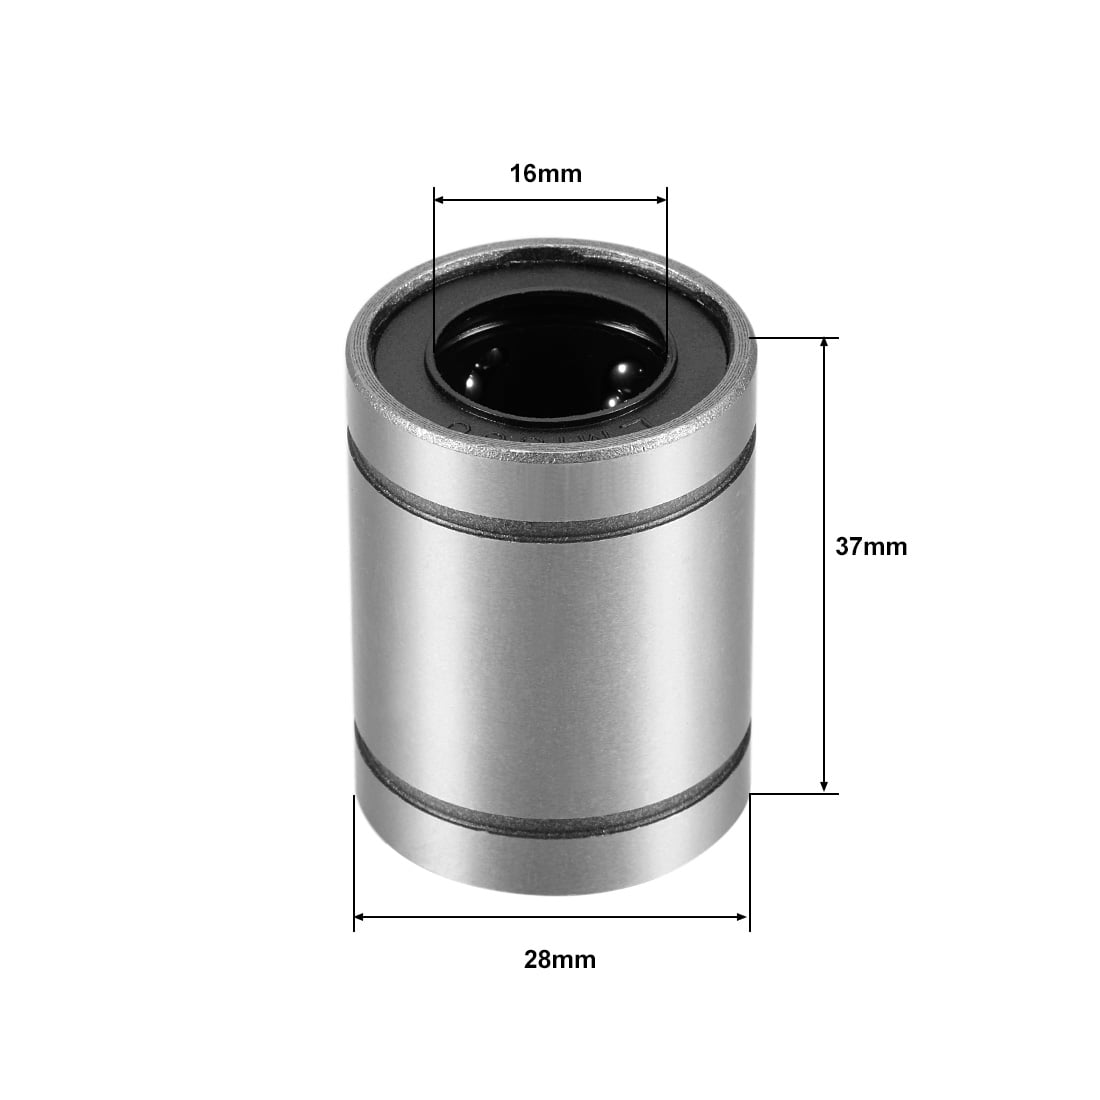 37mm Length with Double Side Rubber Seal Great for CNC,3D Printer 4 Pcs LM16UU Linear Ball Bearings,16mm Bore Dia 28mm OD 